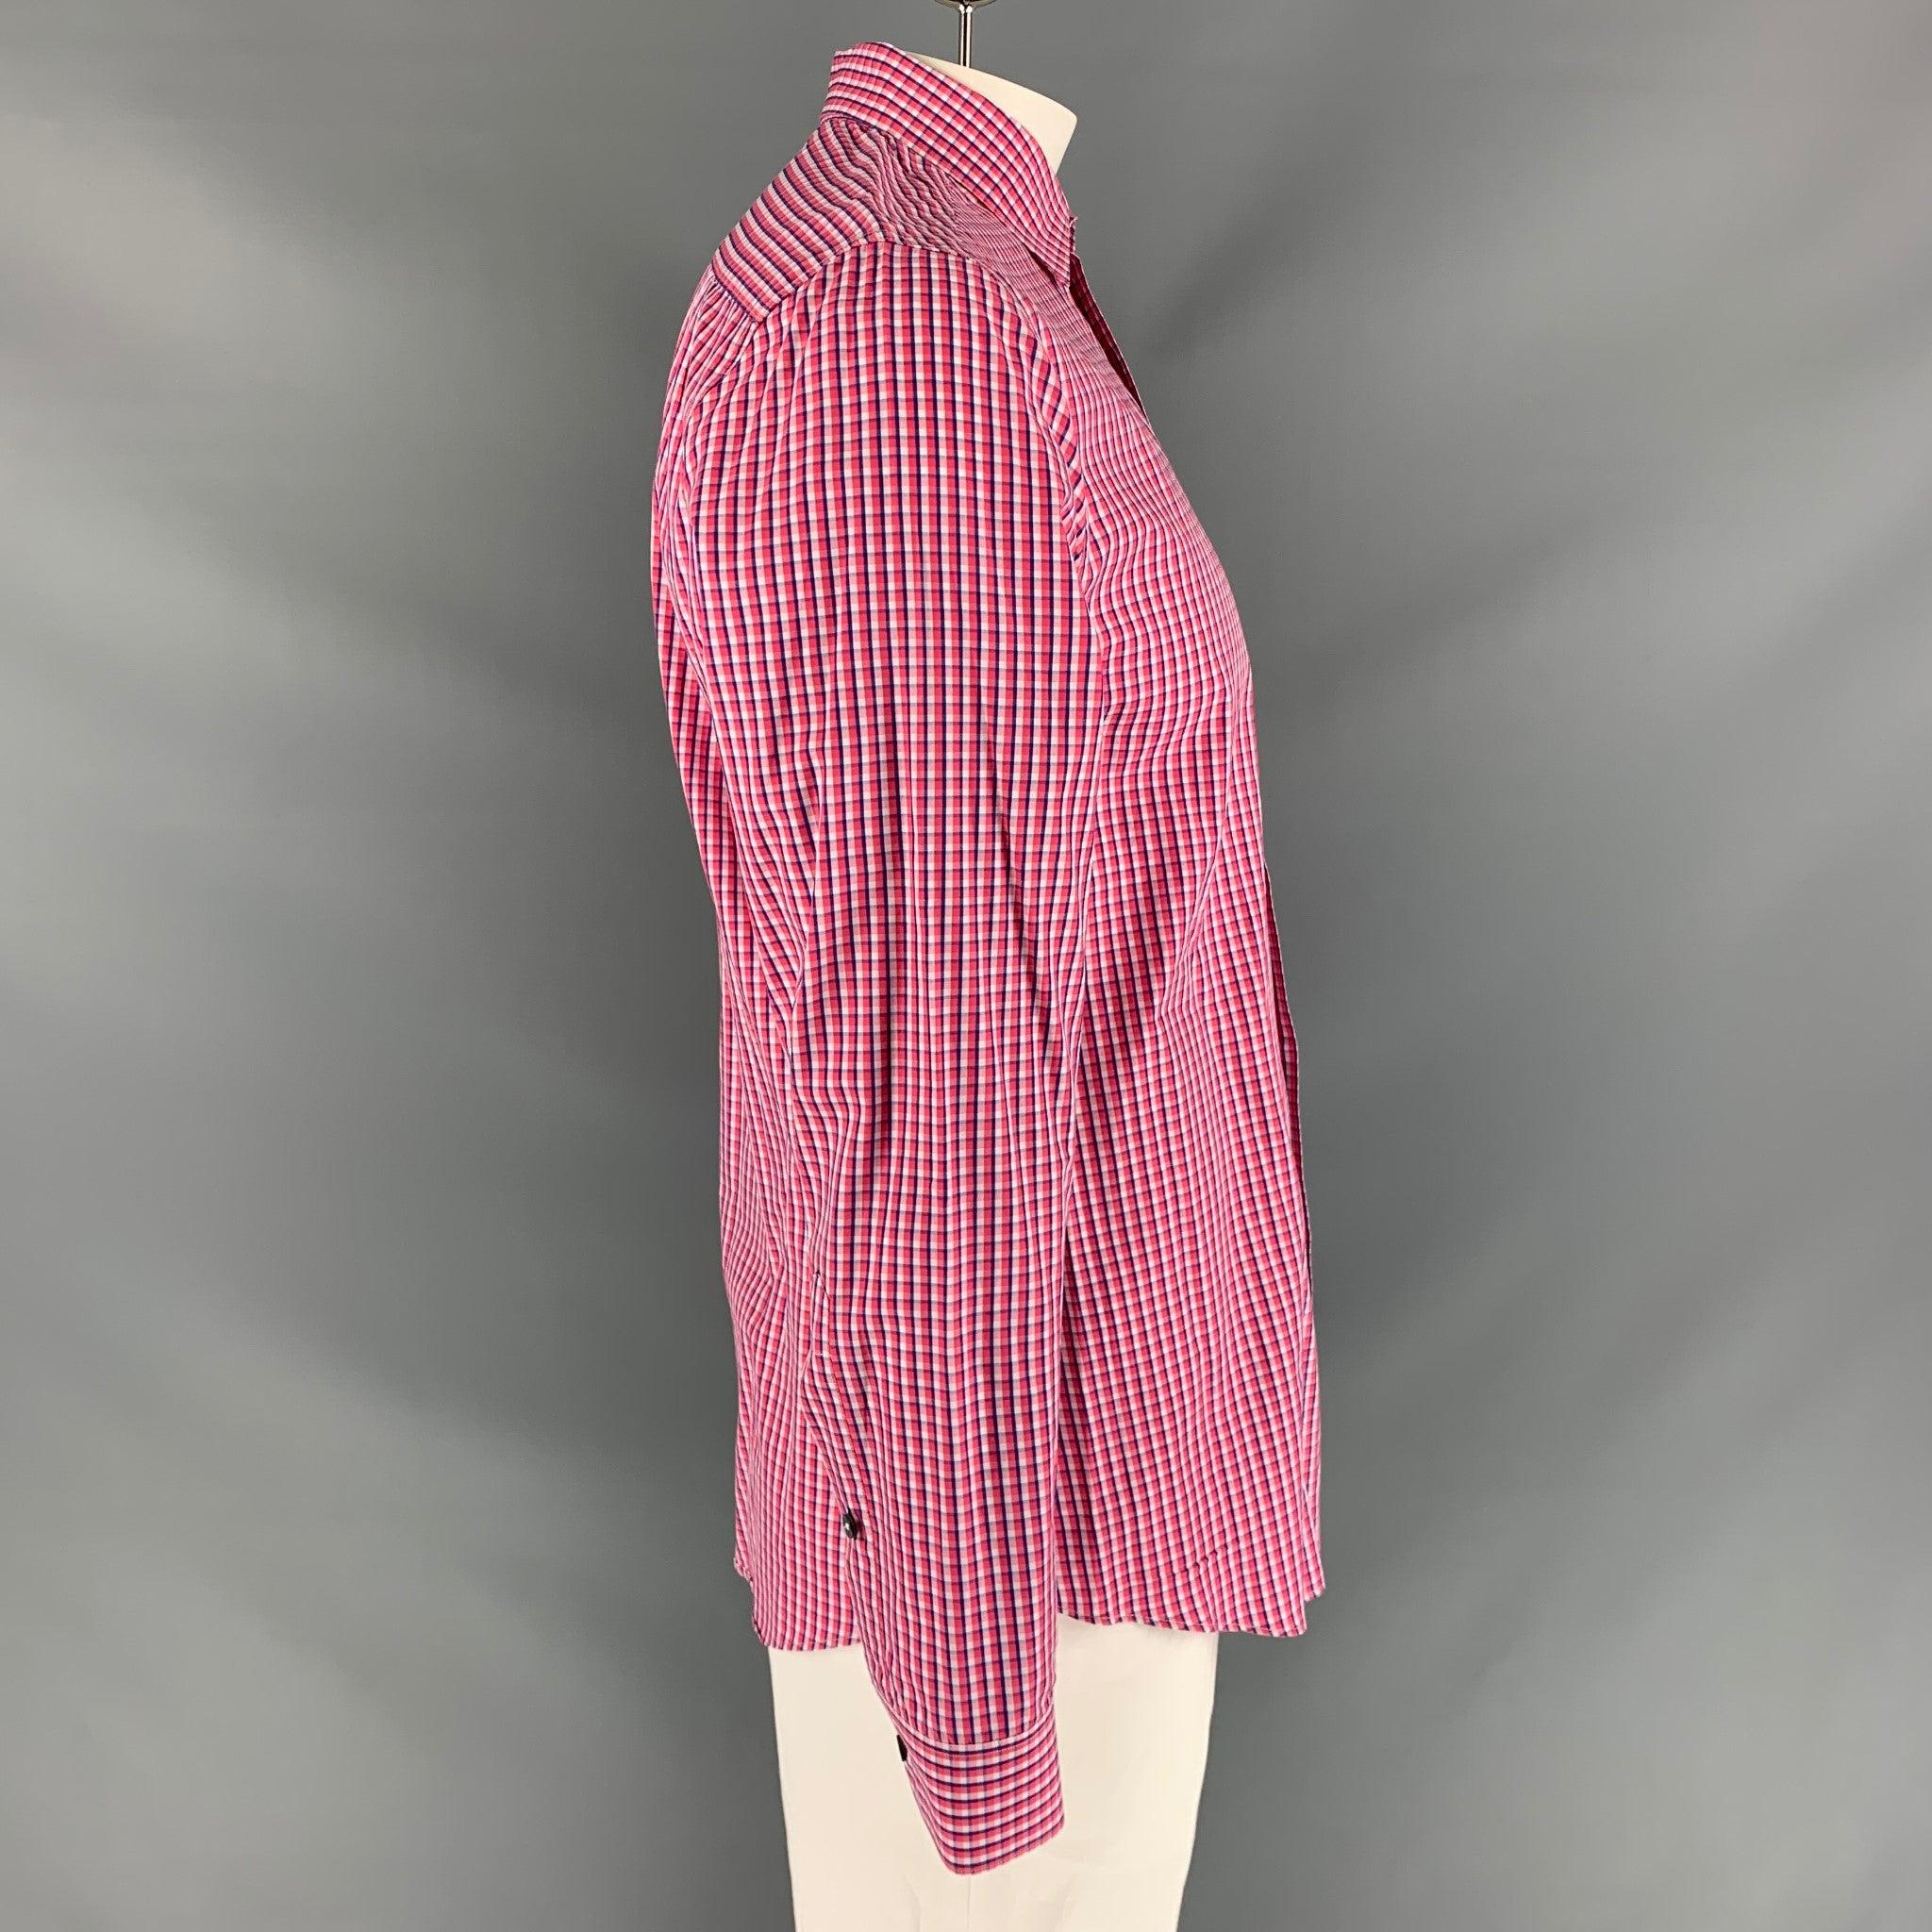 PAUL SMITH Size L Red & White Blue Checkered Cotton Long Sleeve Shirt In Excellent Condition For Sale In San Francisco, CA